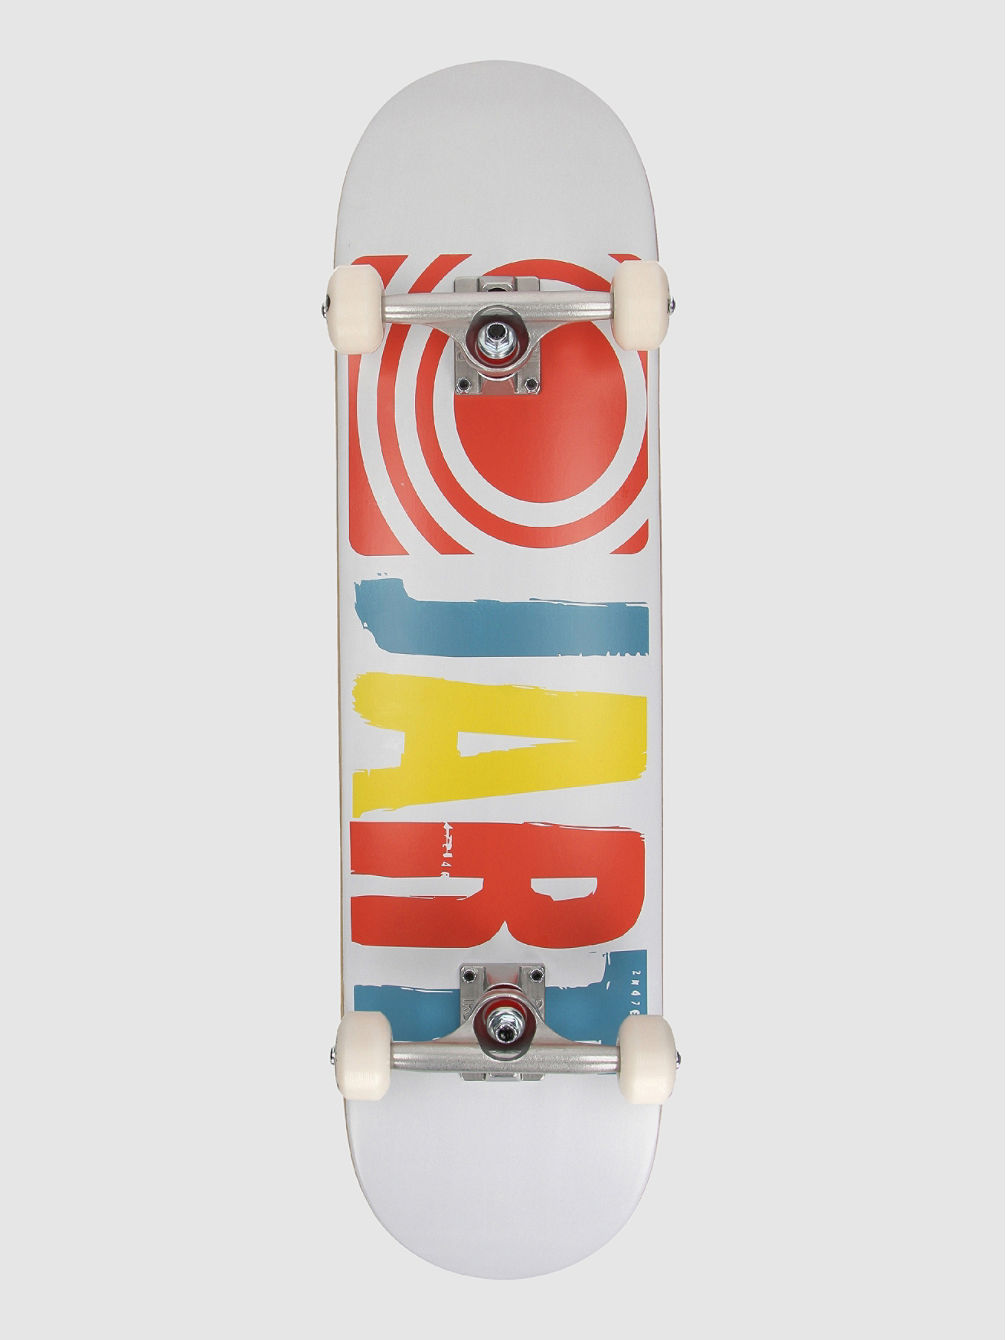 Classic 8.0&amp;#034; Skateboard complet